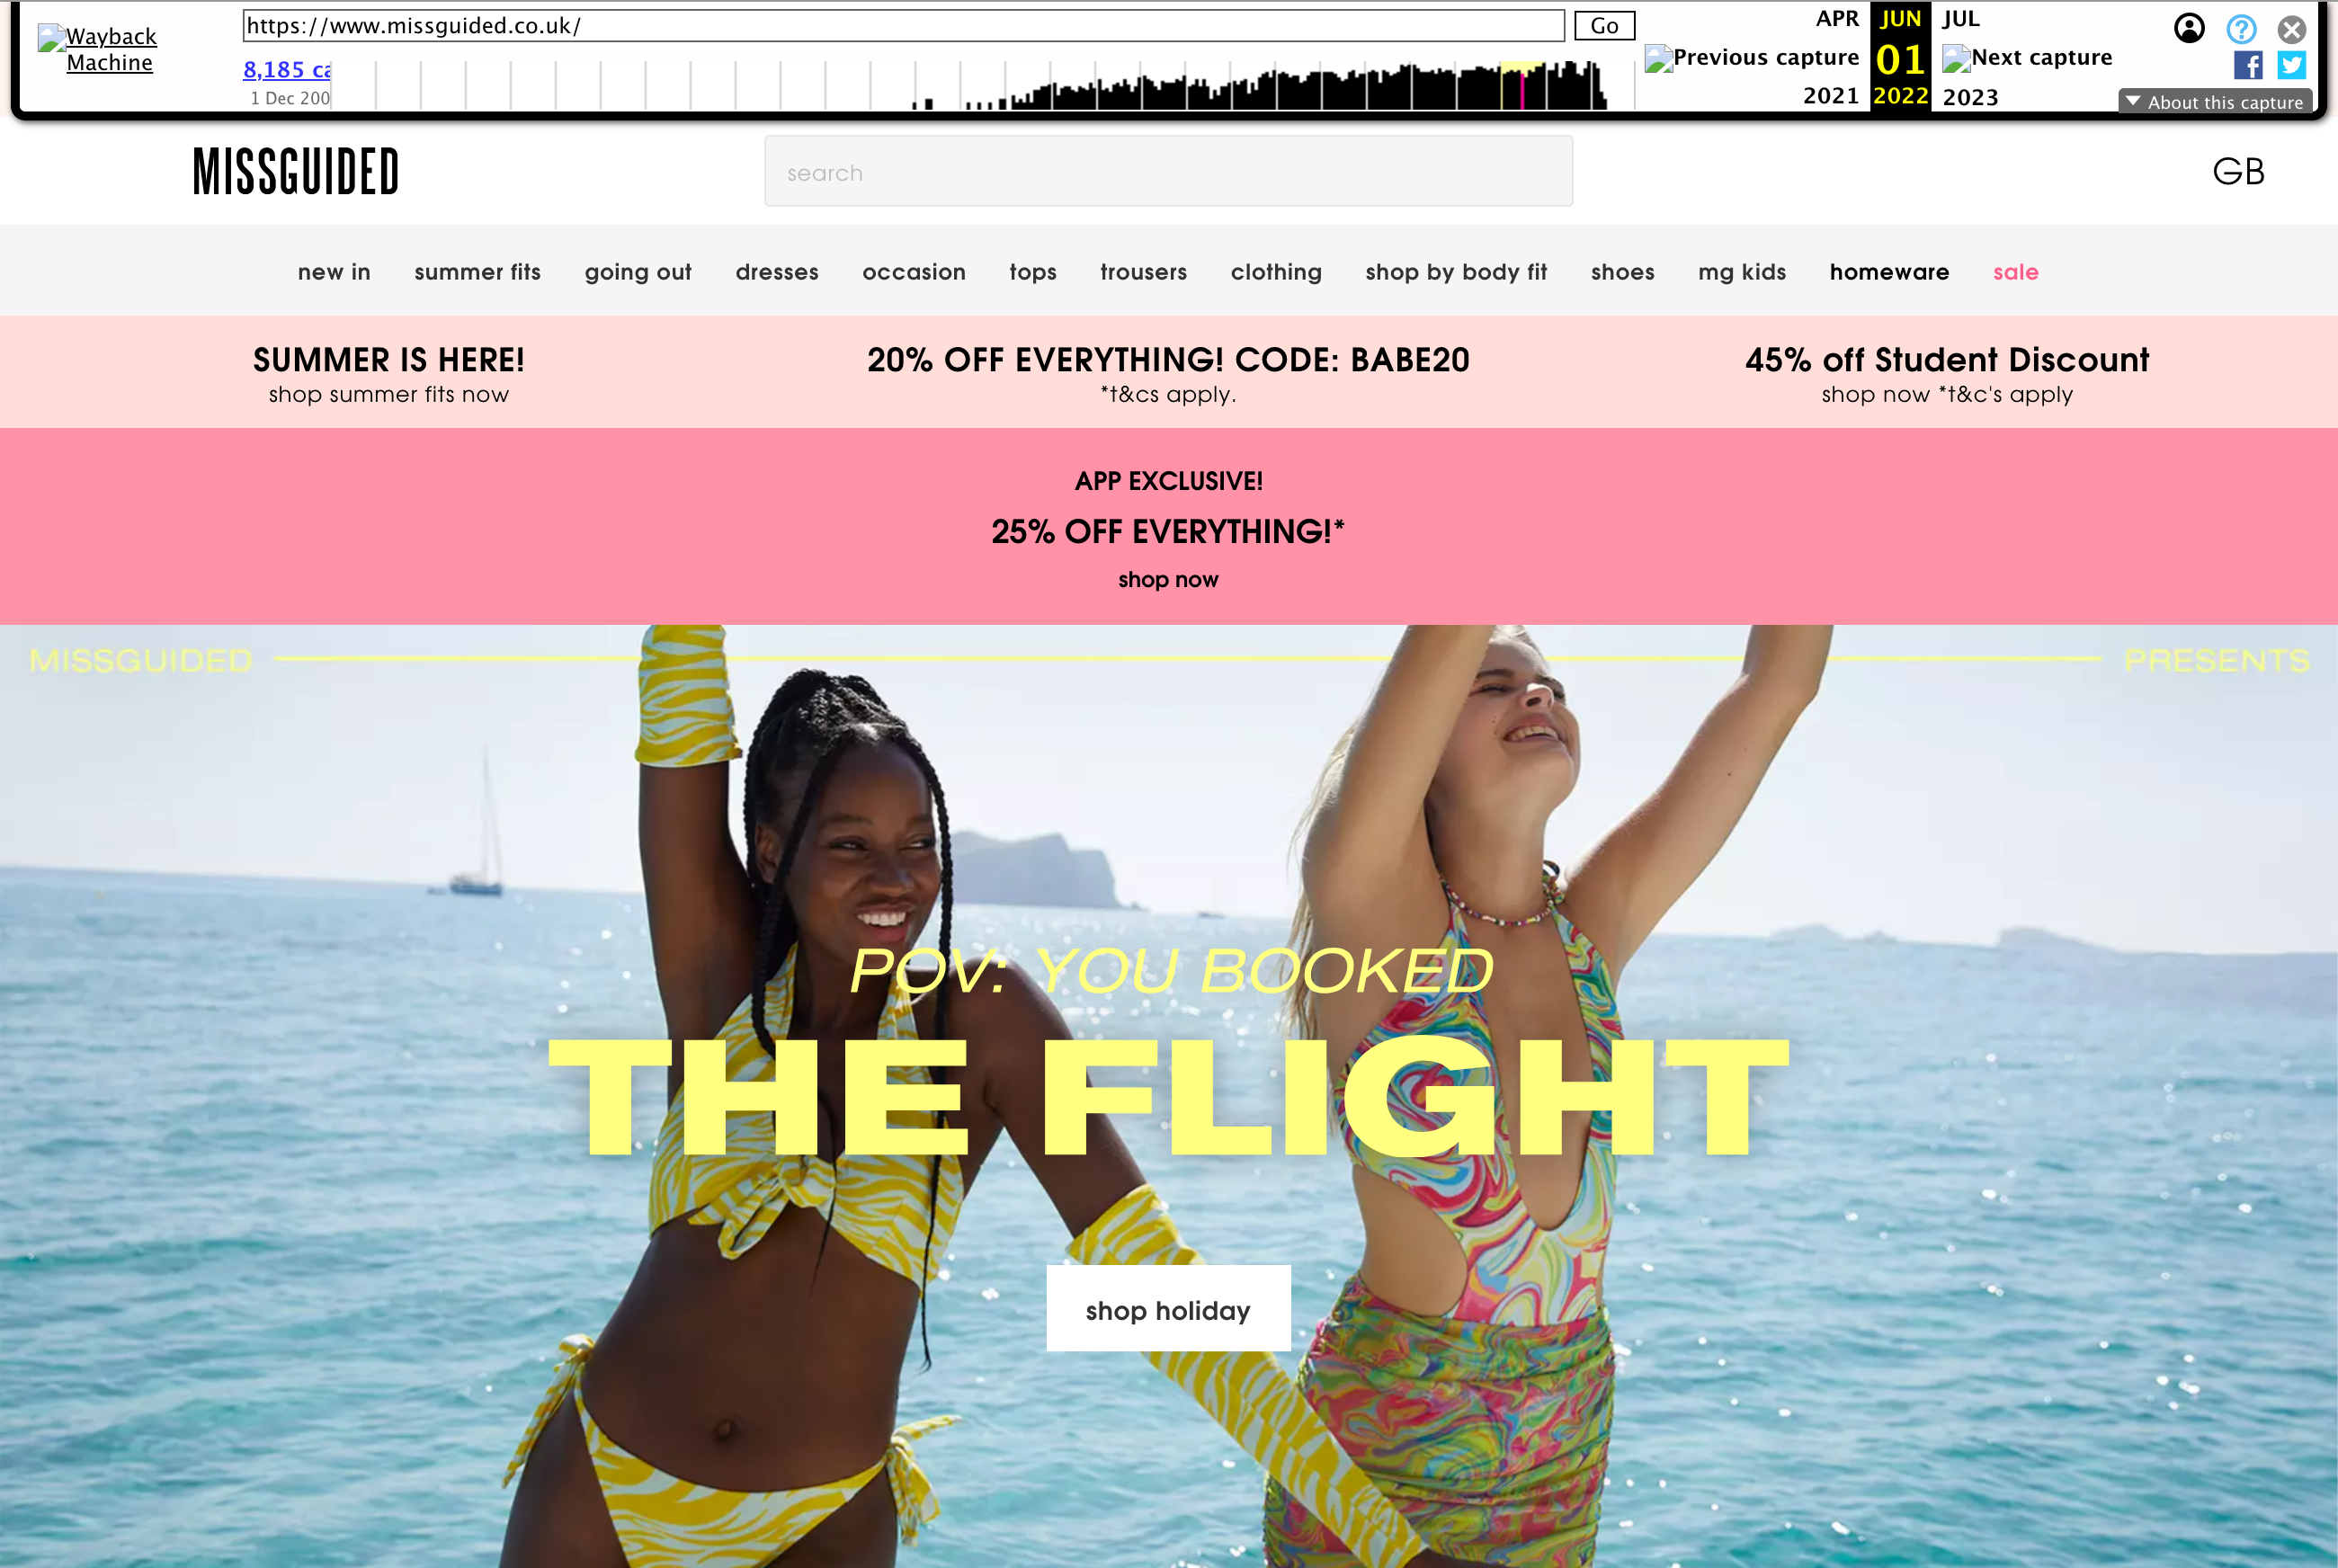 Missguided home page in June 2022.